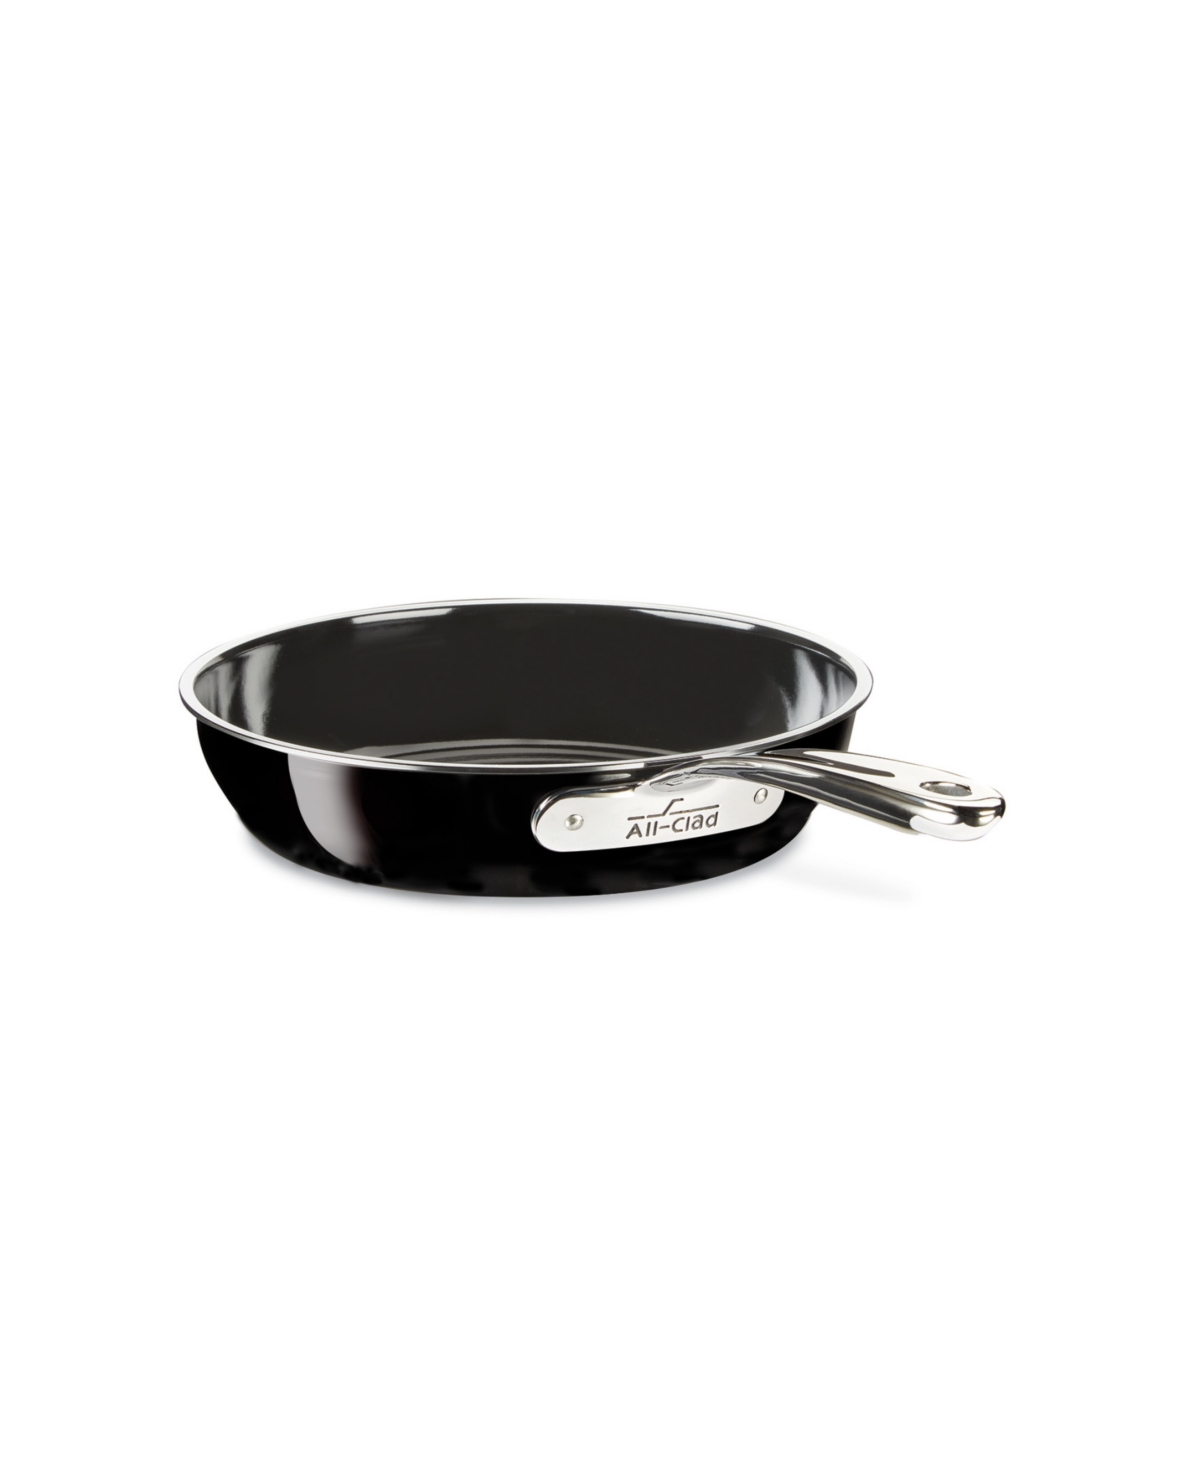 All-clad Fusiontec Natural Ceramic With Steel Core 9.5" Skillet In Black